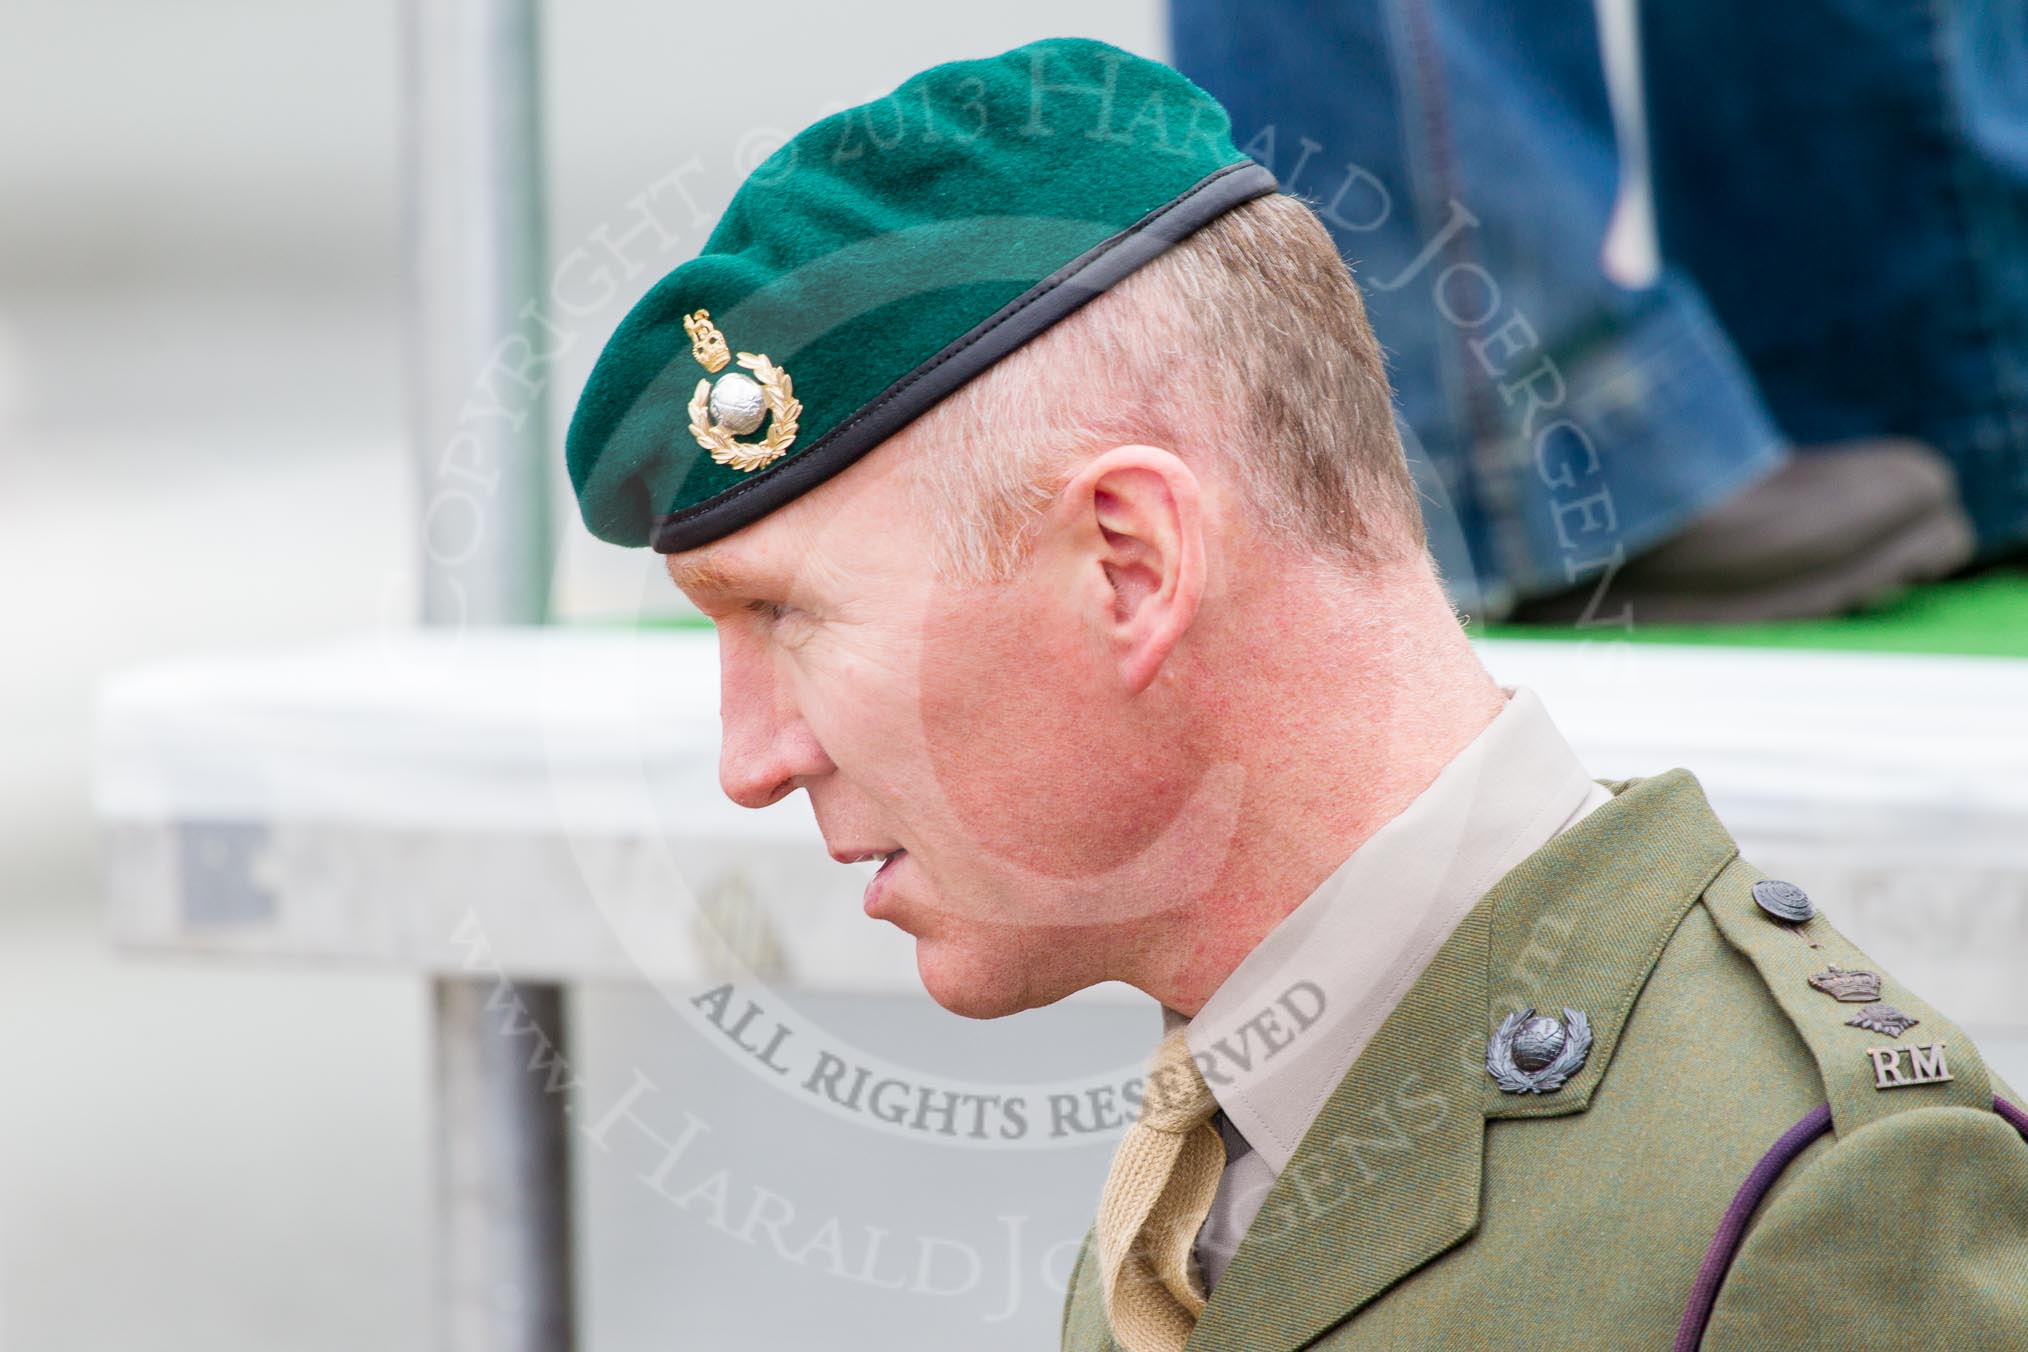 The Boat Race 2013: A Lieutenant-Colonel of the Royal Marines, expecting the delivery of the 2013 Boat Race trophy on the river by Royal Marines..
Putney,
London SW15,

United Kingdom,
on 31 March 2013 at 14:13, image #65